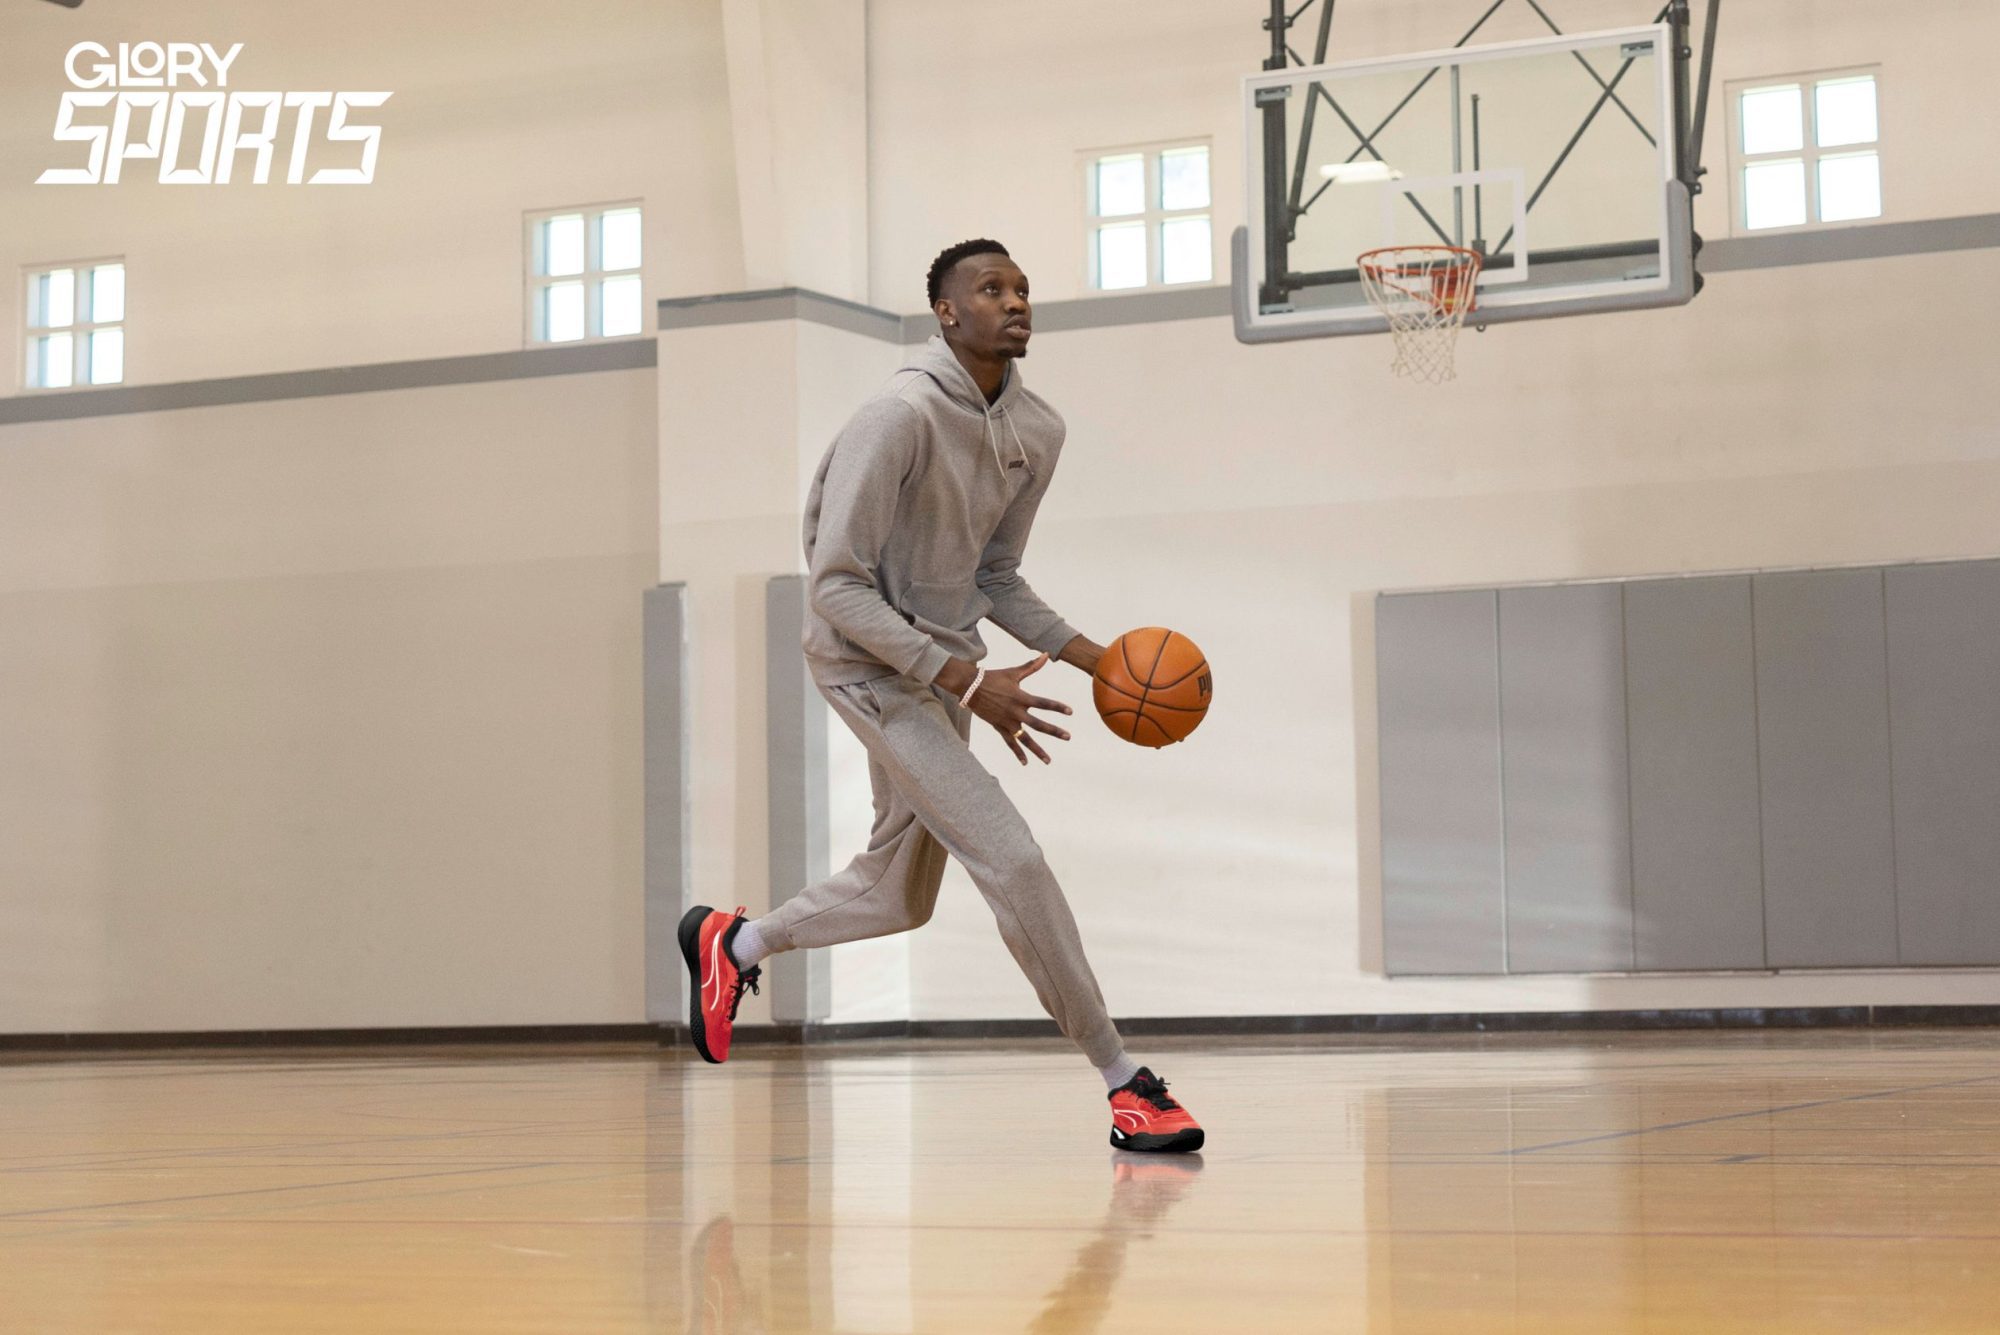 Chris Boucher wearing a grey sweatsuit and red basketball shoes. He is dribbling a basketball on a court.